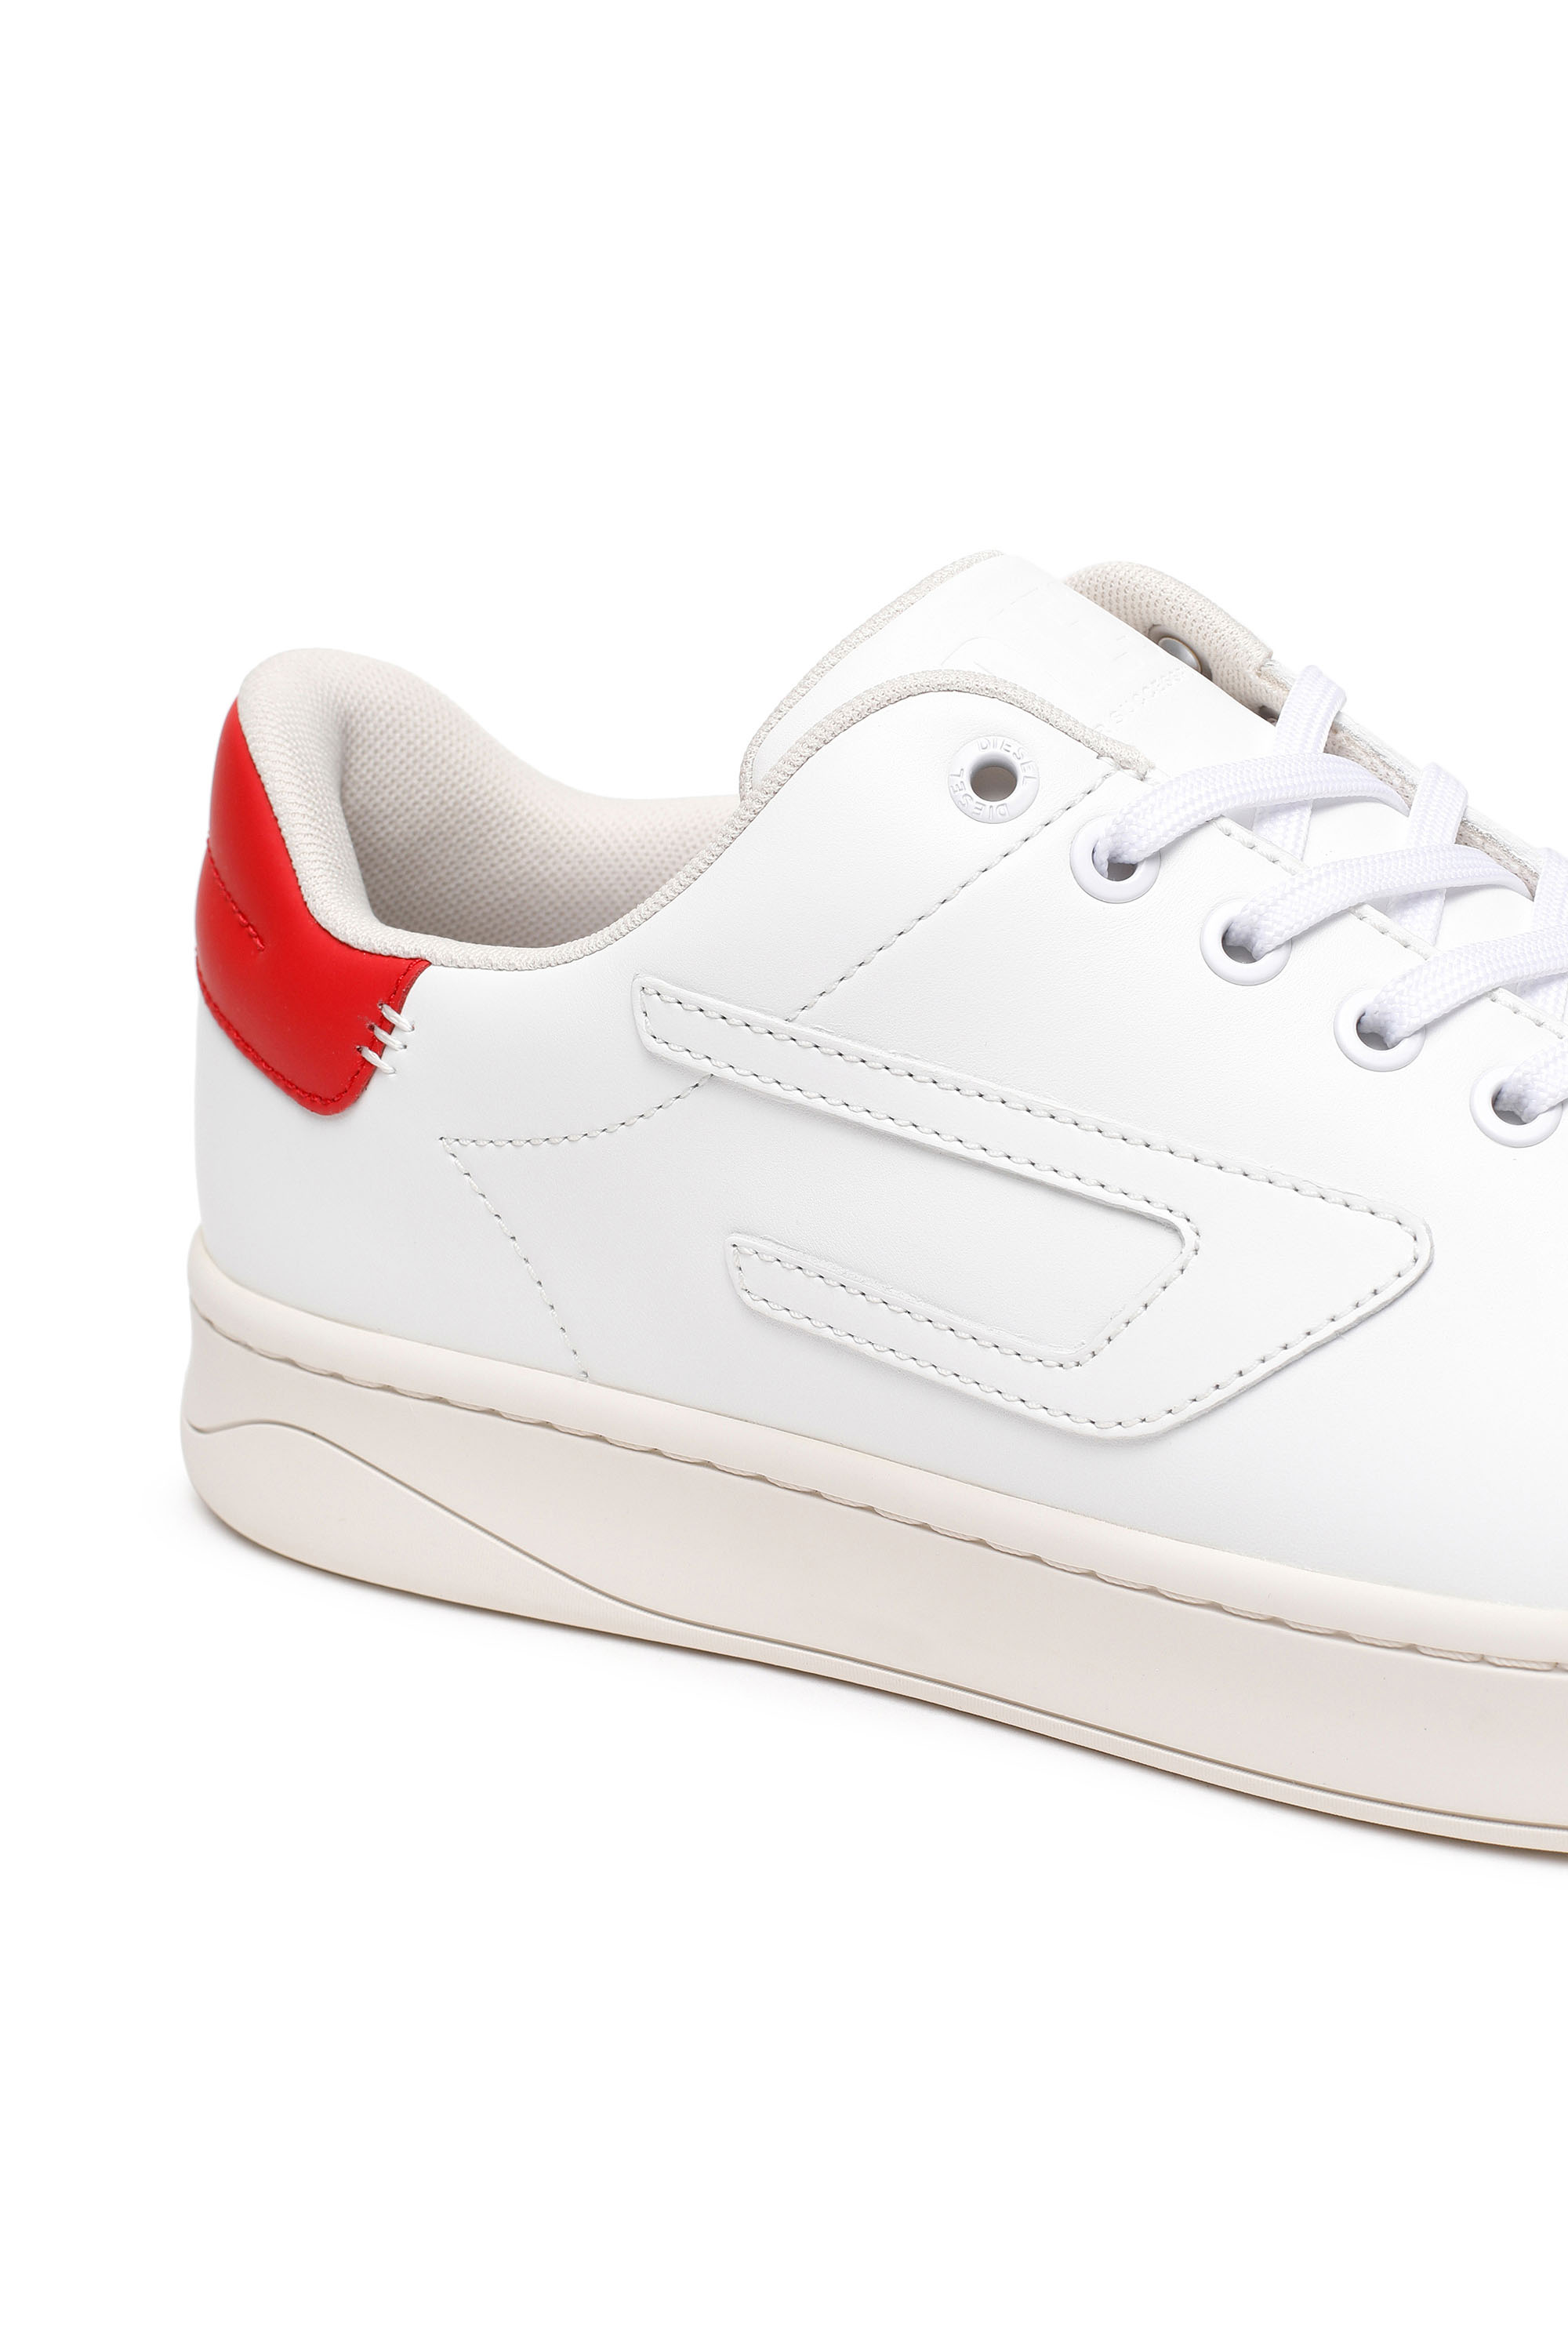 Diesel - S-ATHENE LOW, Bianco/Rosso - Image 6